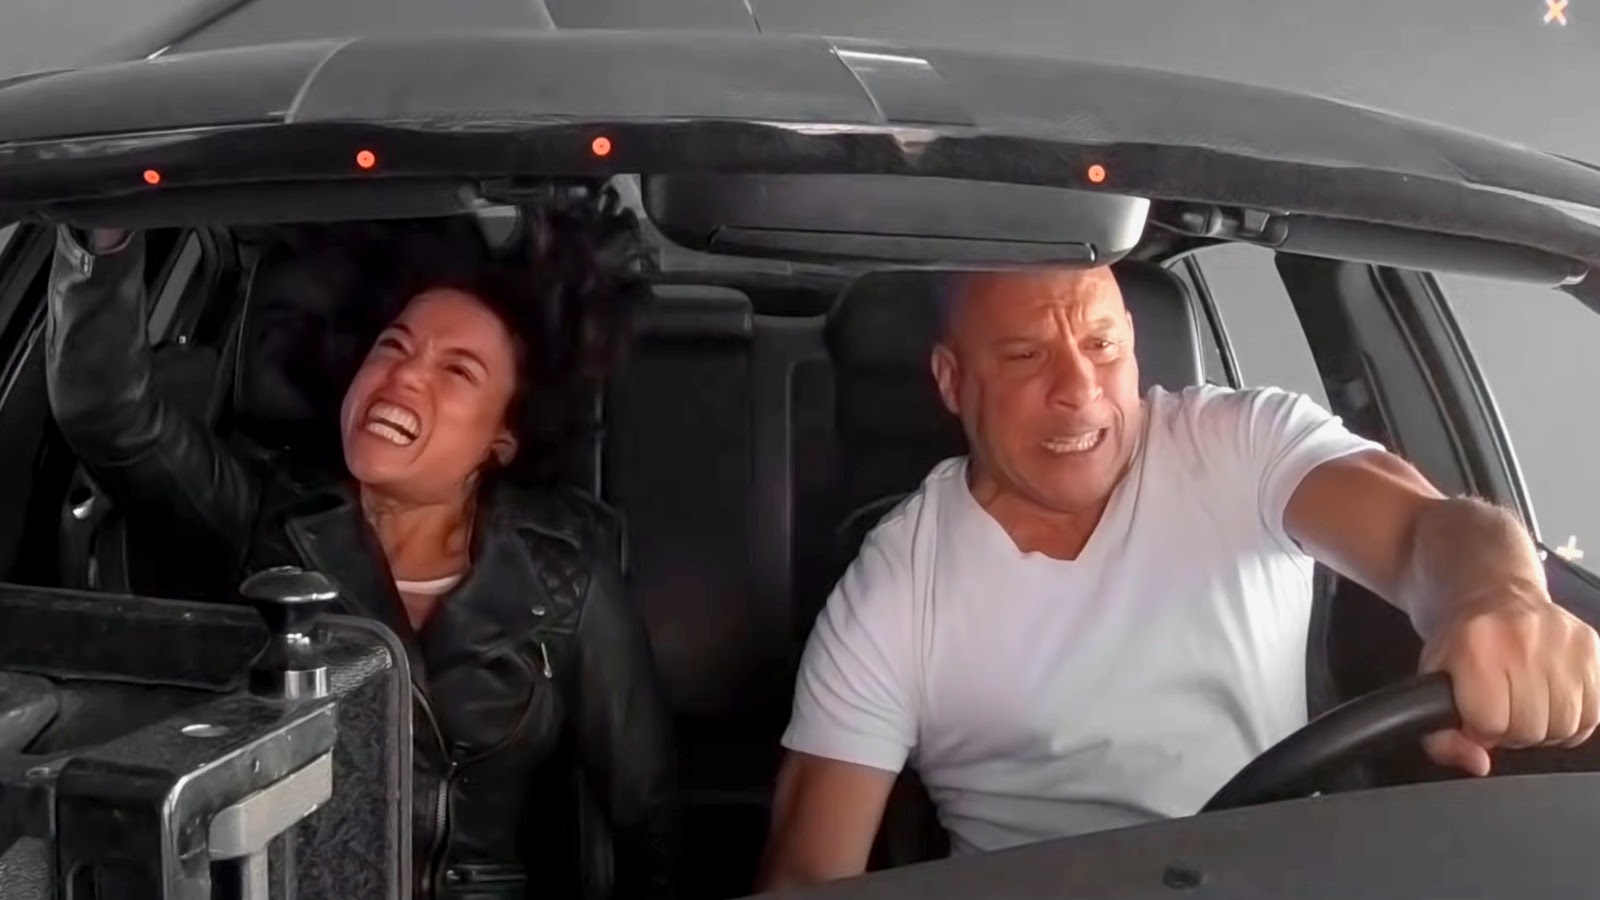 Michelle Rodriguez and Vin Diesel inside the rolling car rig